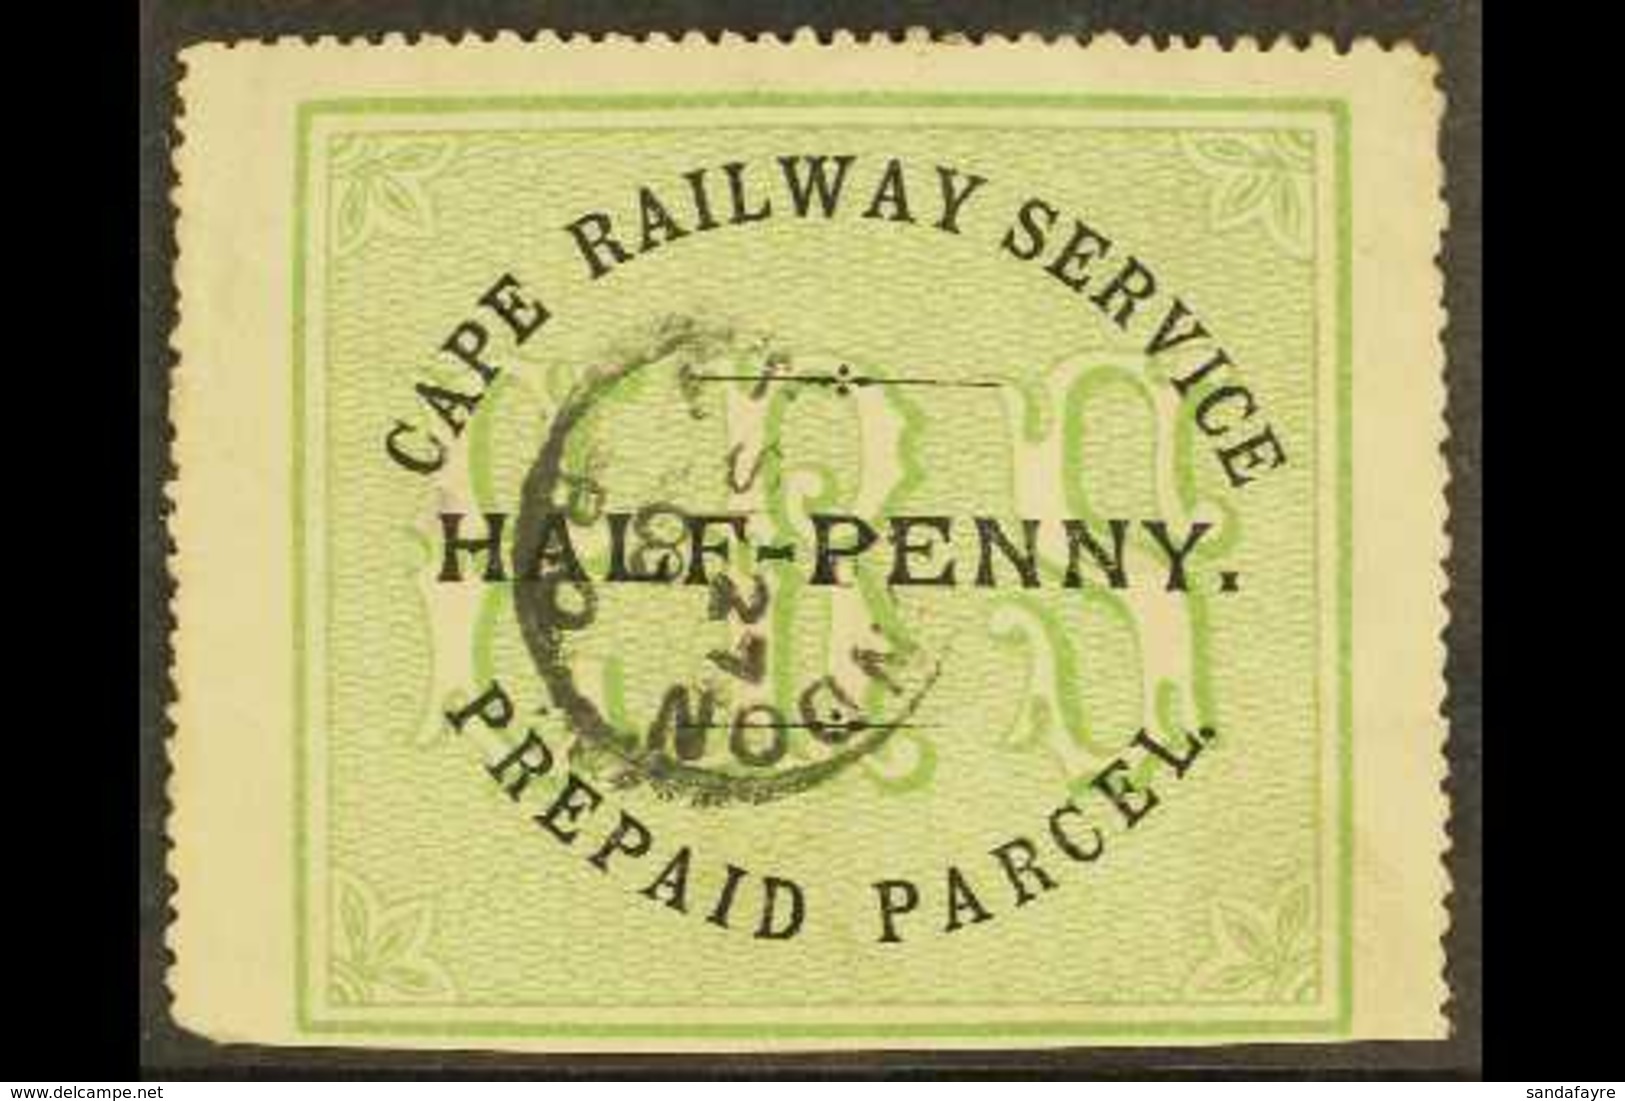 CAPE CAPE RAILWAY SERVICE 1882 ½d Black & Green Local Railway Stamp, Used, Small Corner Crease, Scarce. For More Images, - Ohne Zuordnung